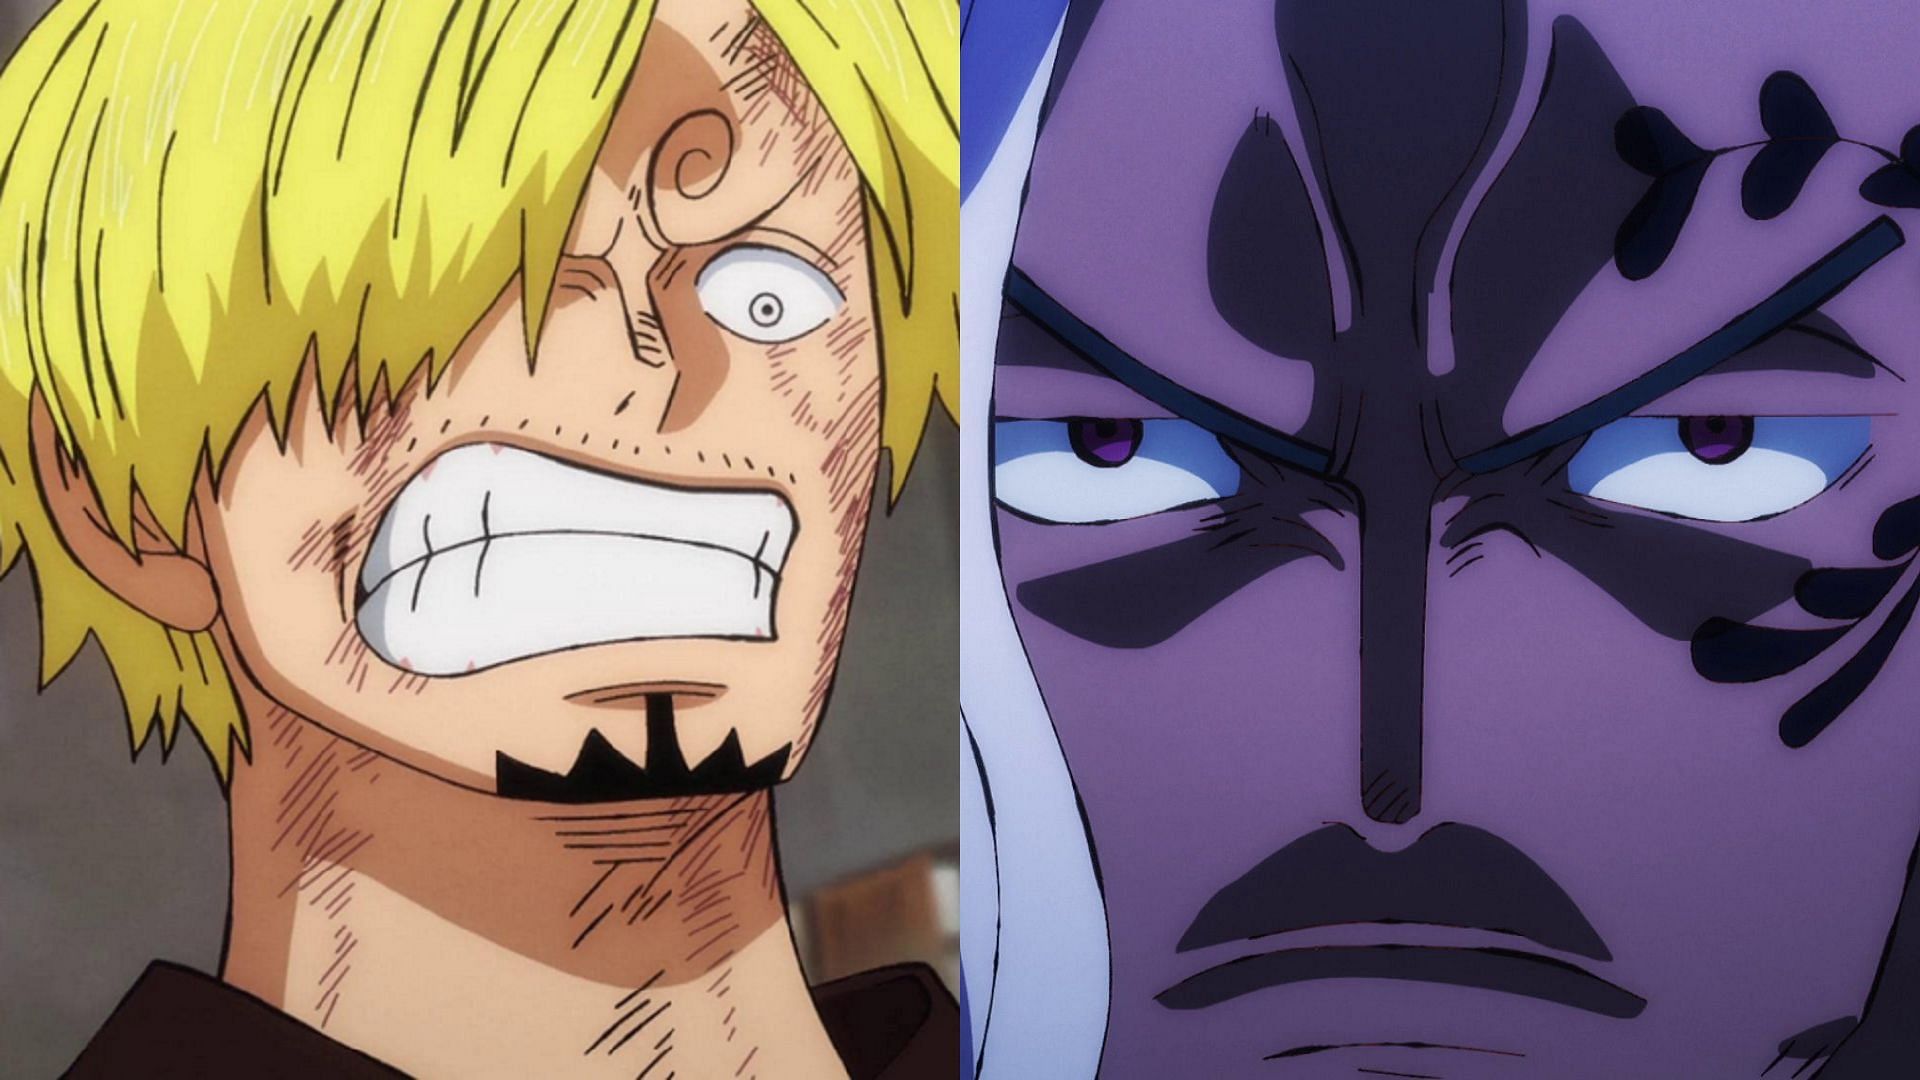 In Wano, Sanji was not strong enough to win against King (Image via Toei Animation, One Piece)